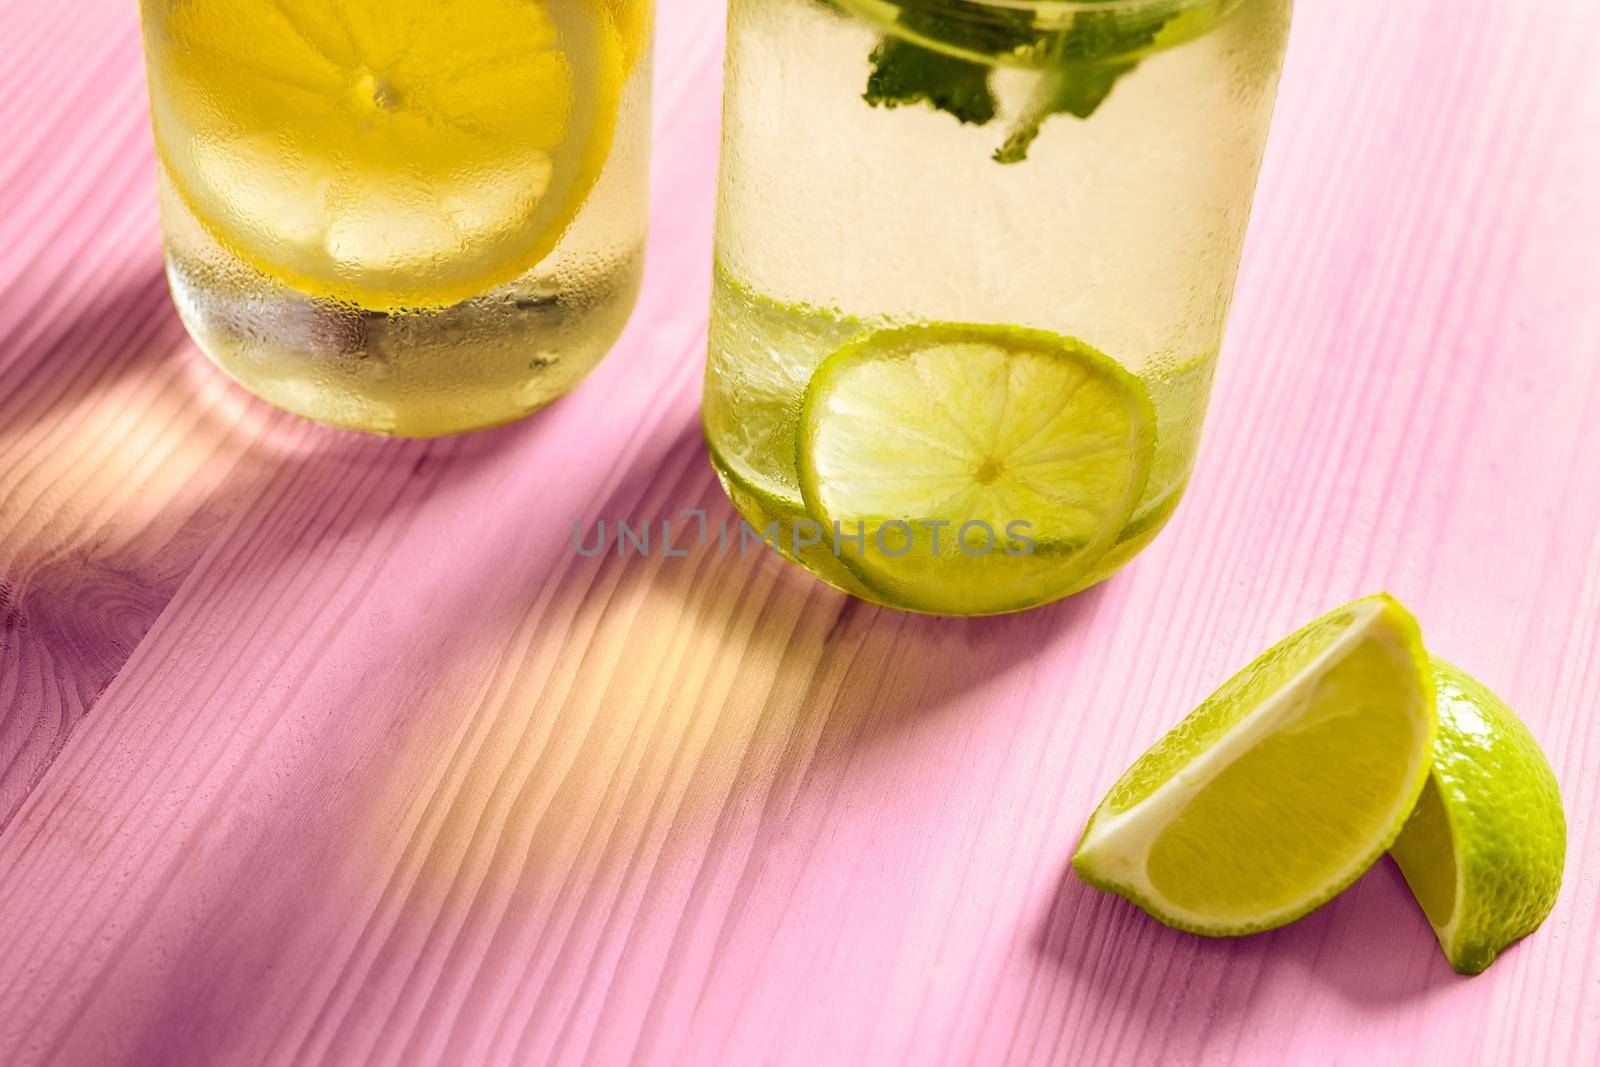 cold summer refreshments with slices of citrus and mint leaves, are on a pink wooden table and illuminated by sunlight, there are also lemon wedges and copy space